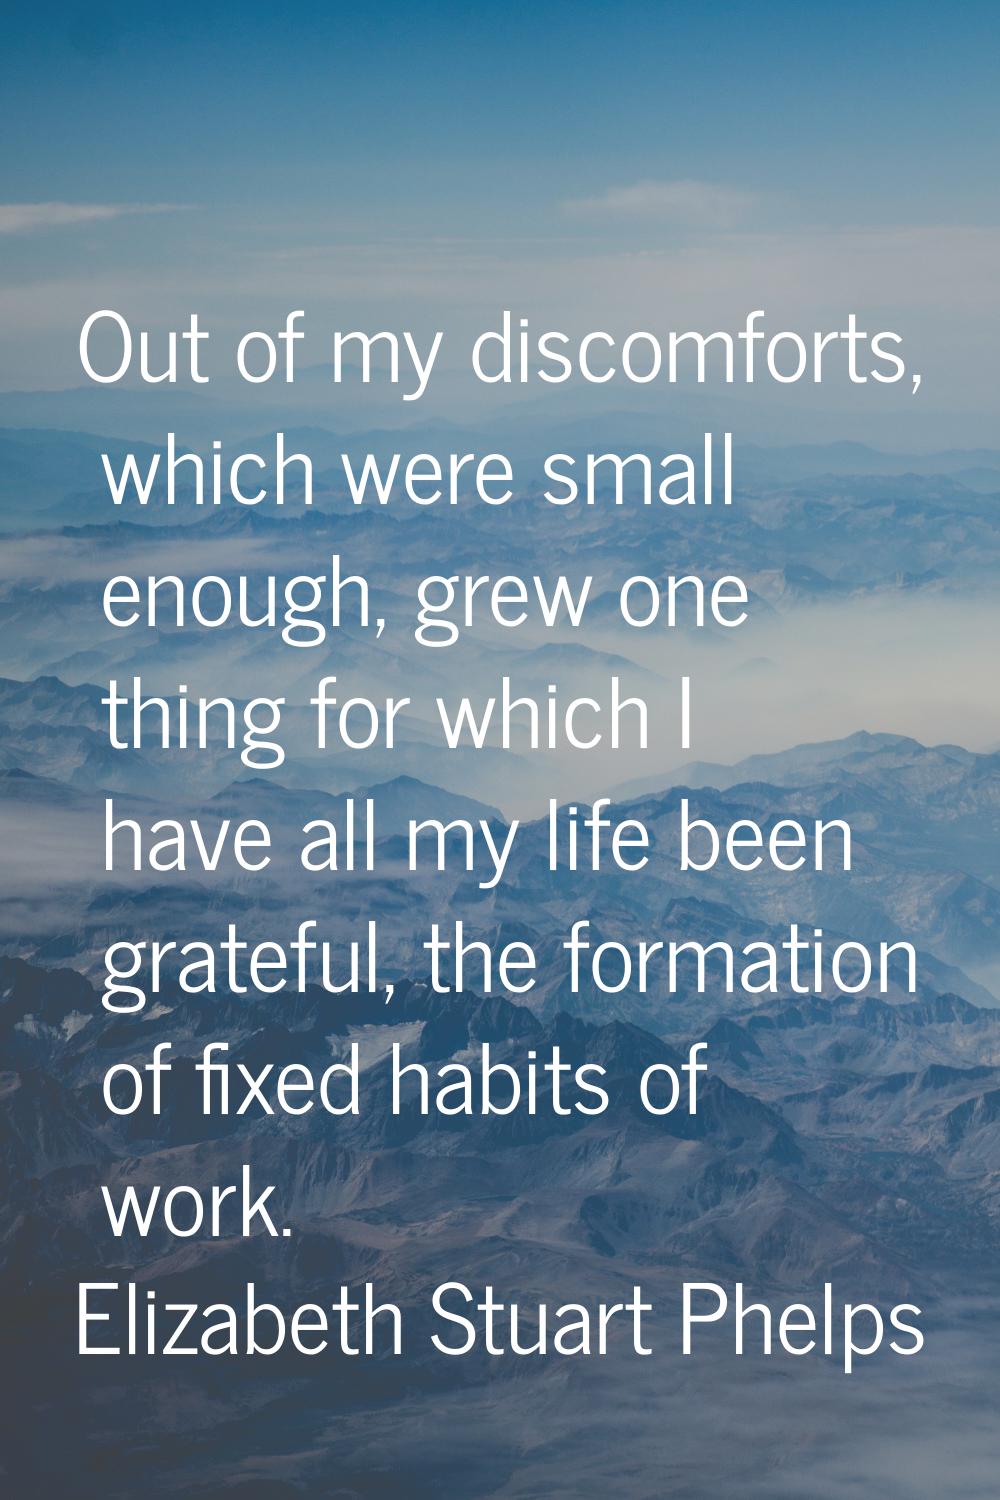 Out of my discomforts, which were small enough, grew one thing for which I have all my life been gr